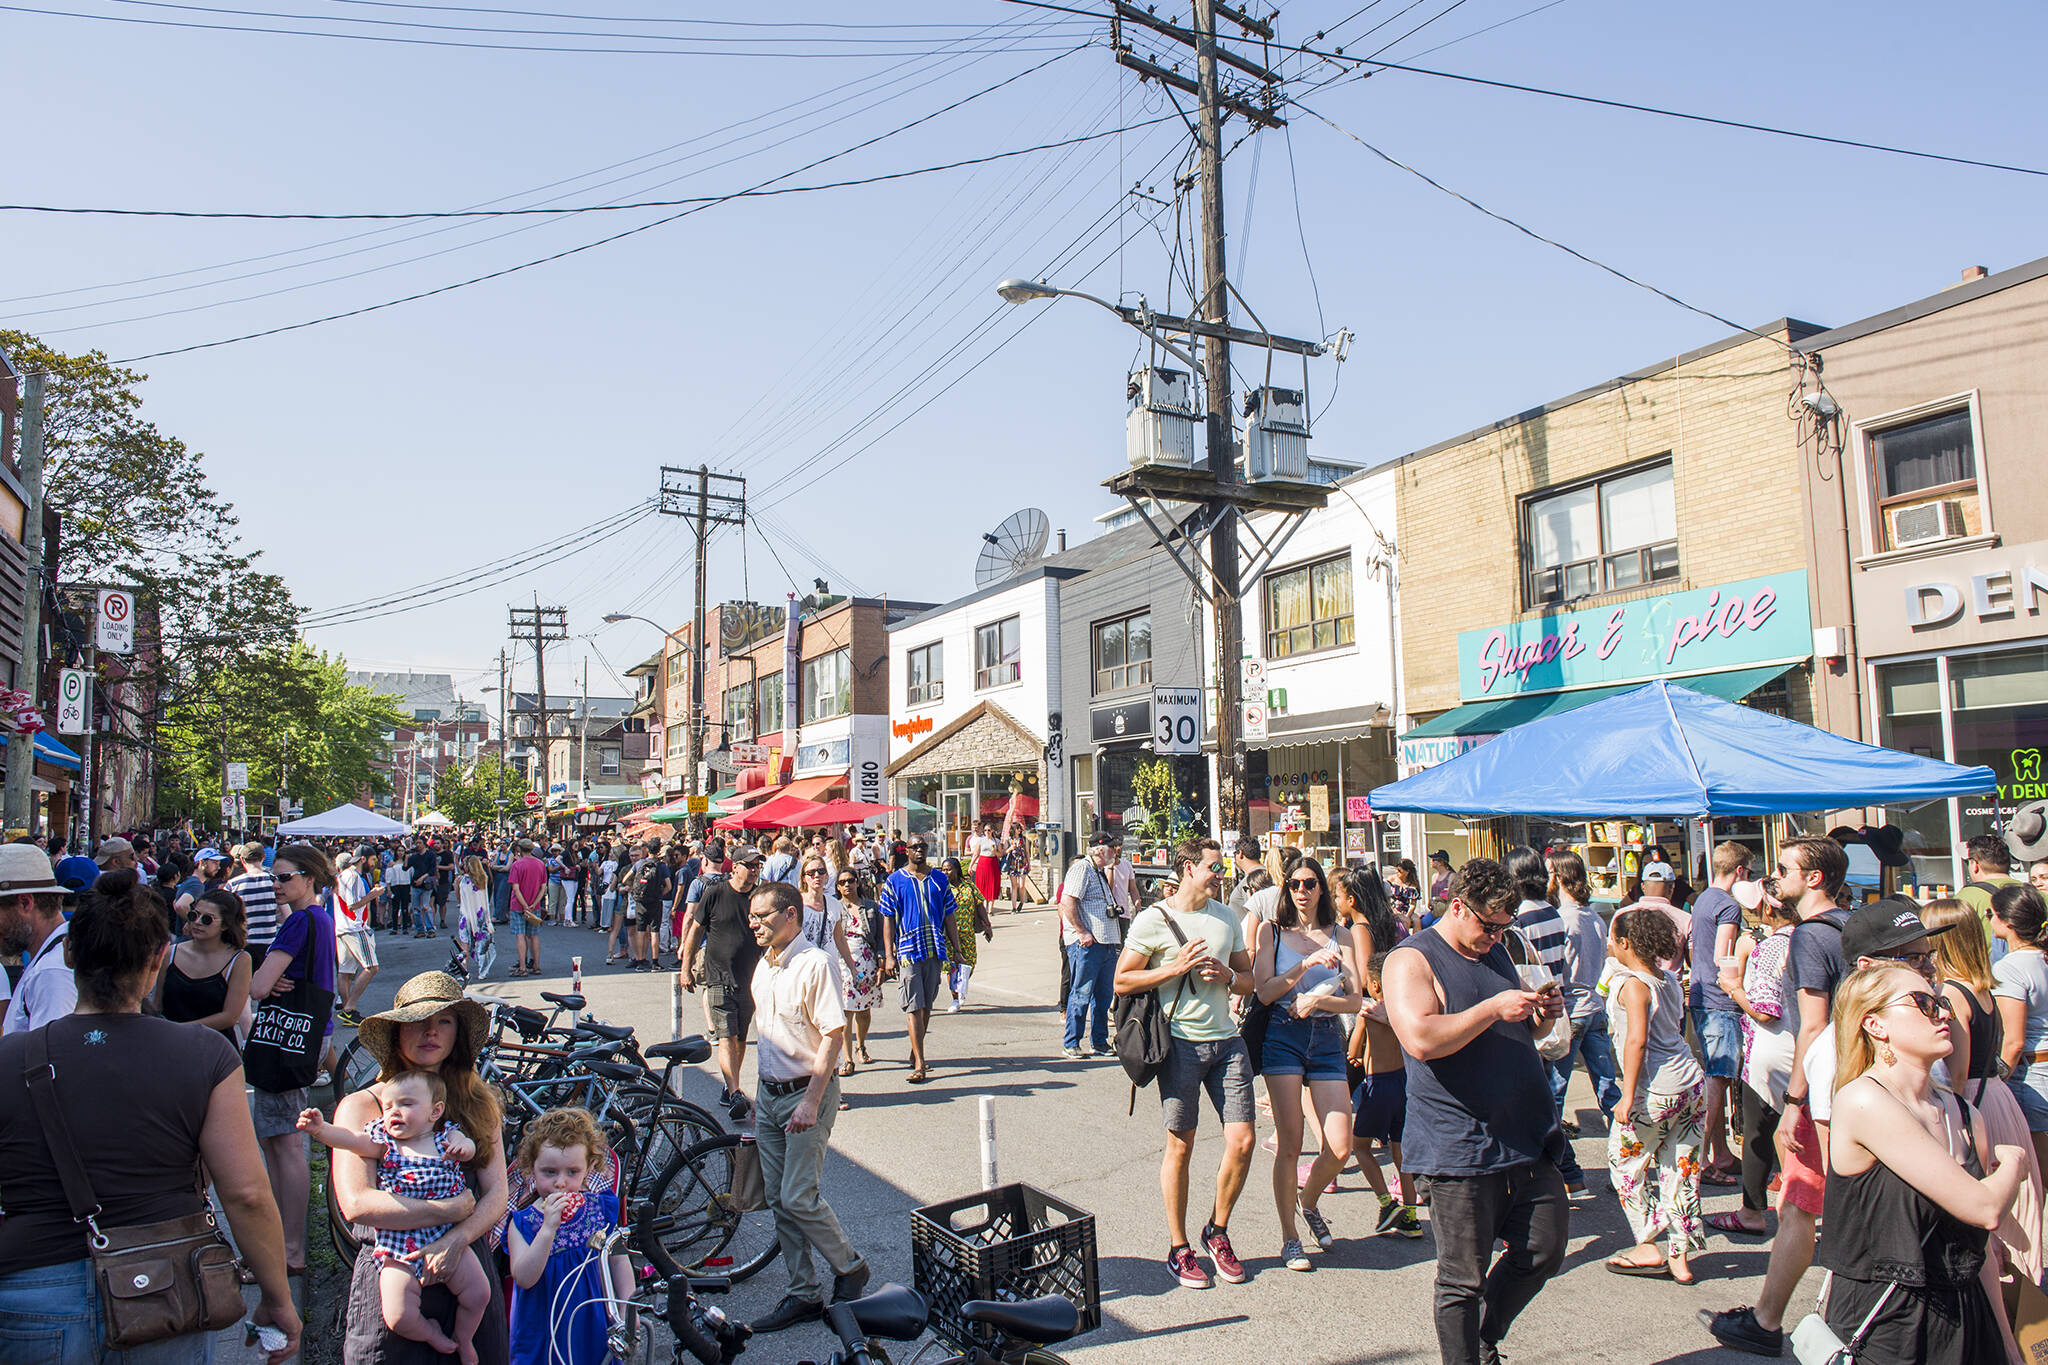 How to spend a day in Kensington Market and Chinatown